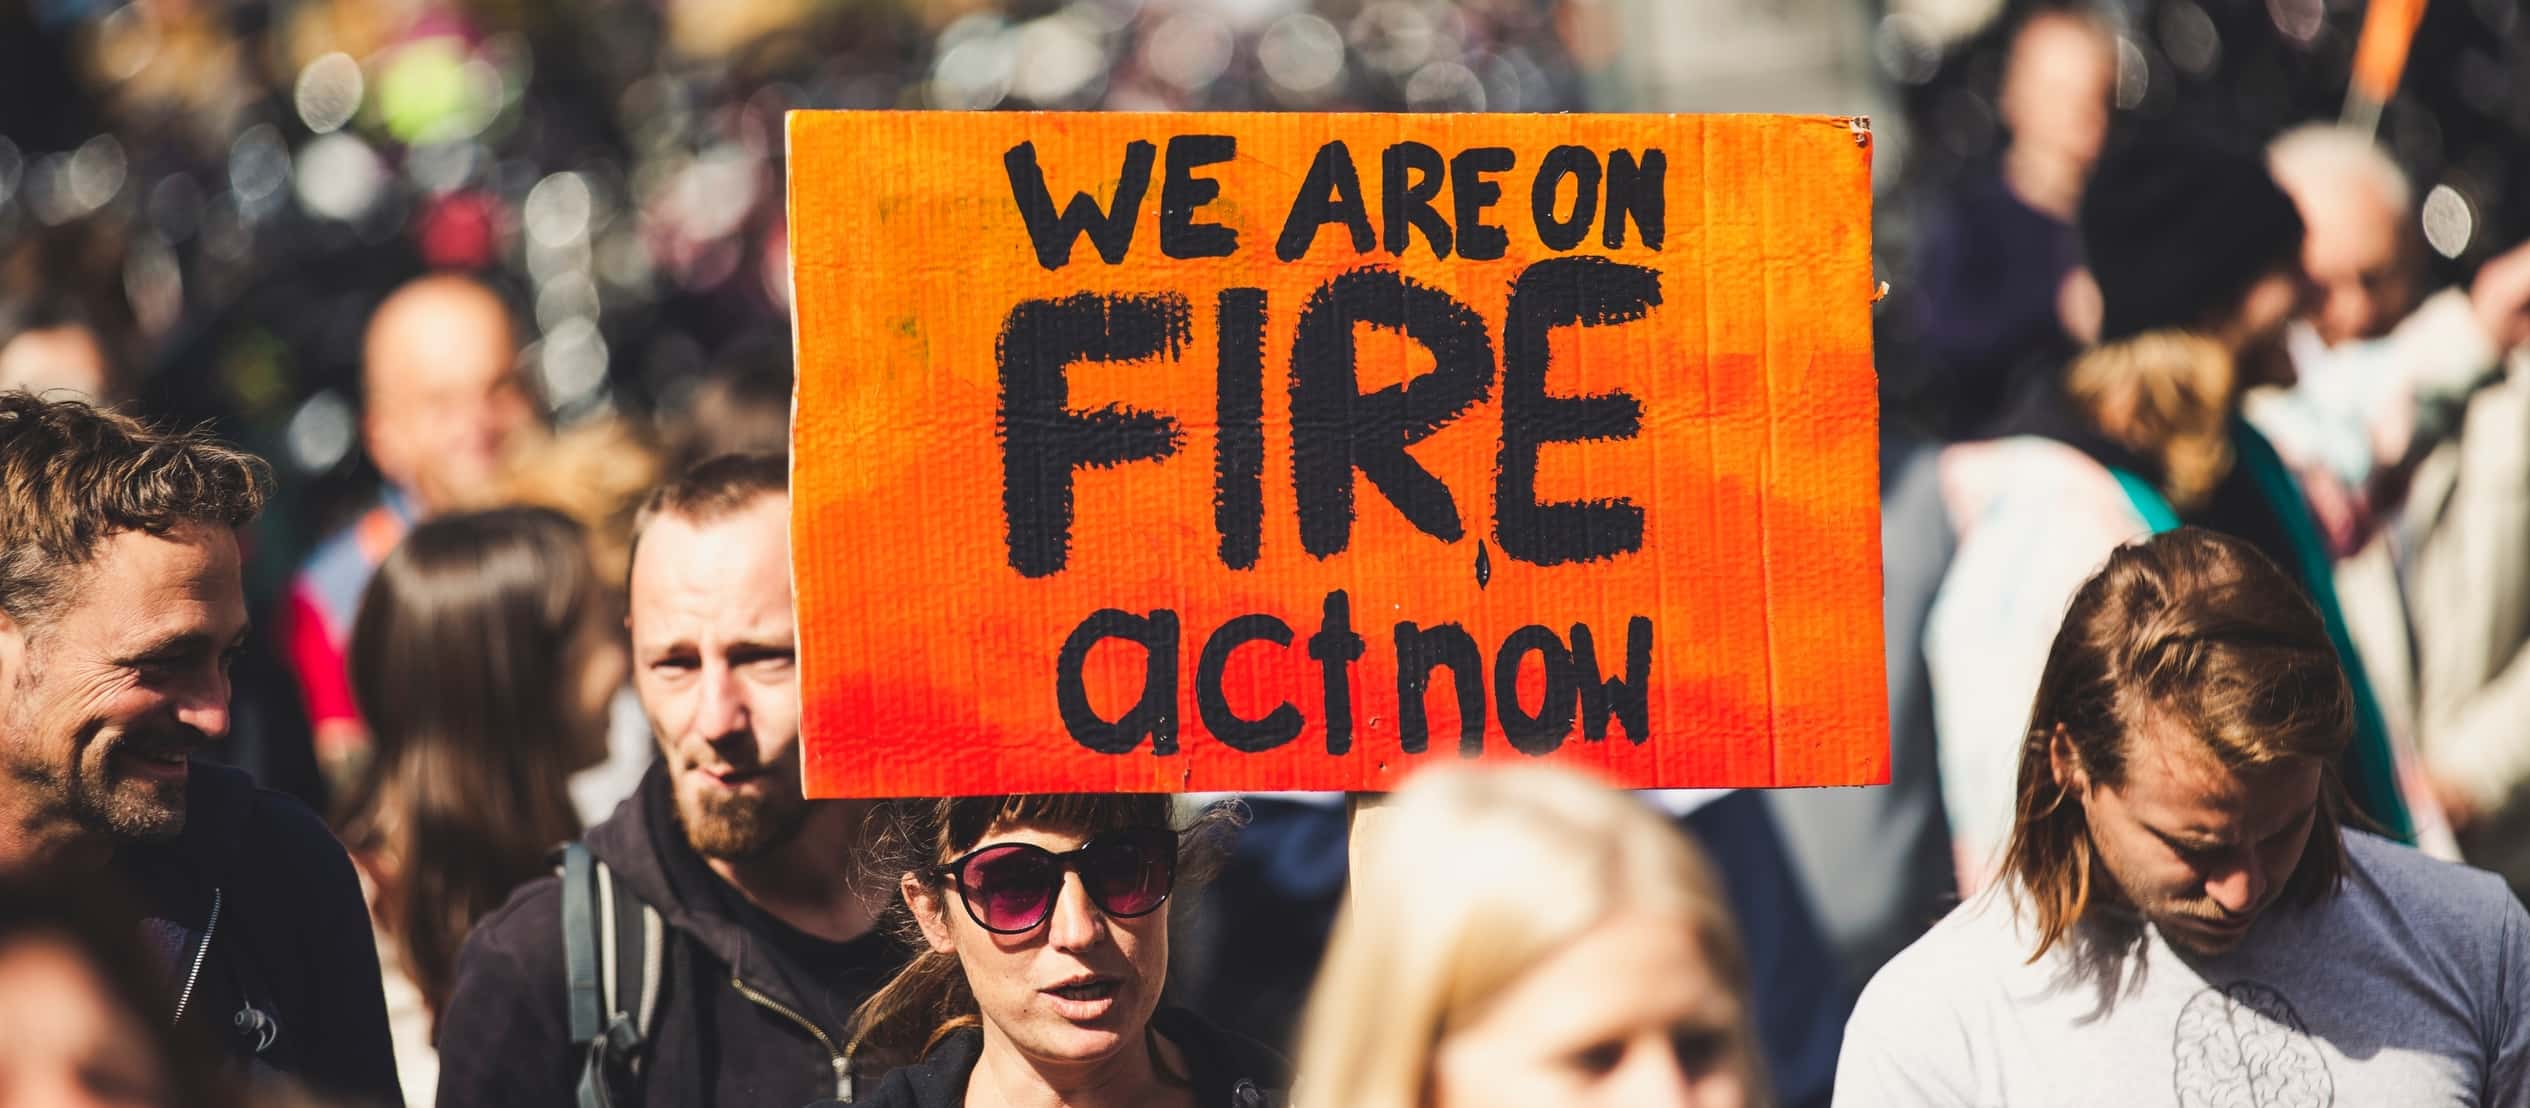 “We are on fire act now” banner (Source: Unsplash)